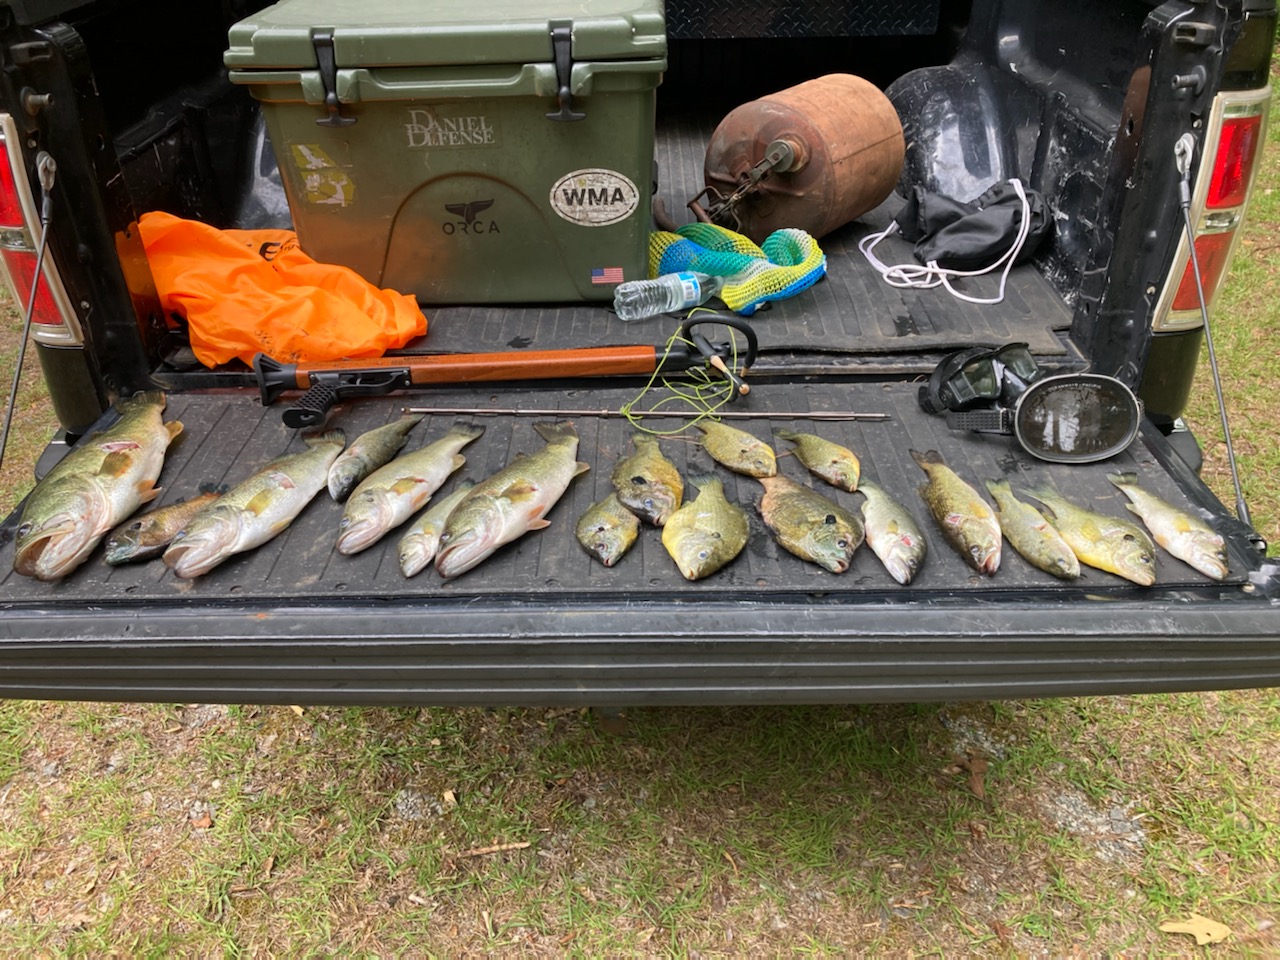 Georgia DNR officers arrested and charged men for spearfishing panfish without licenses